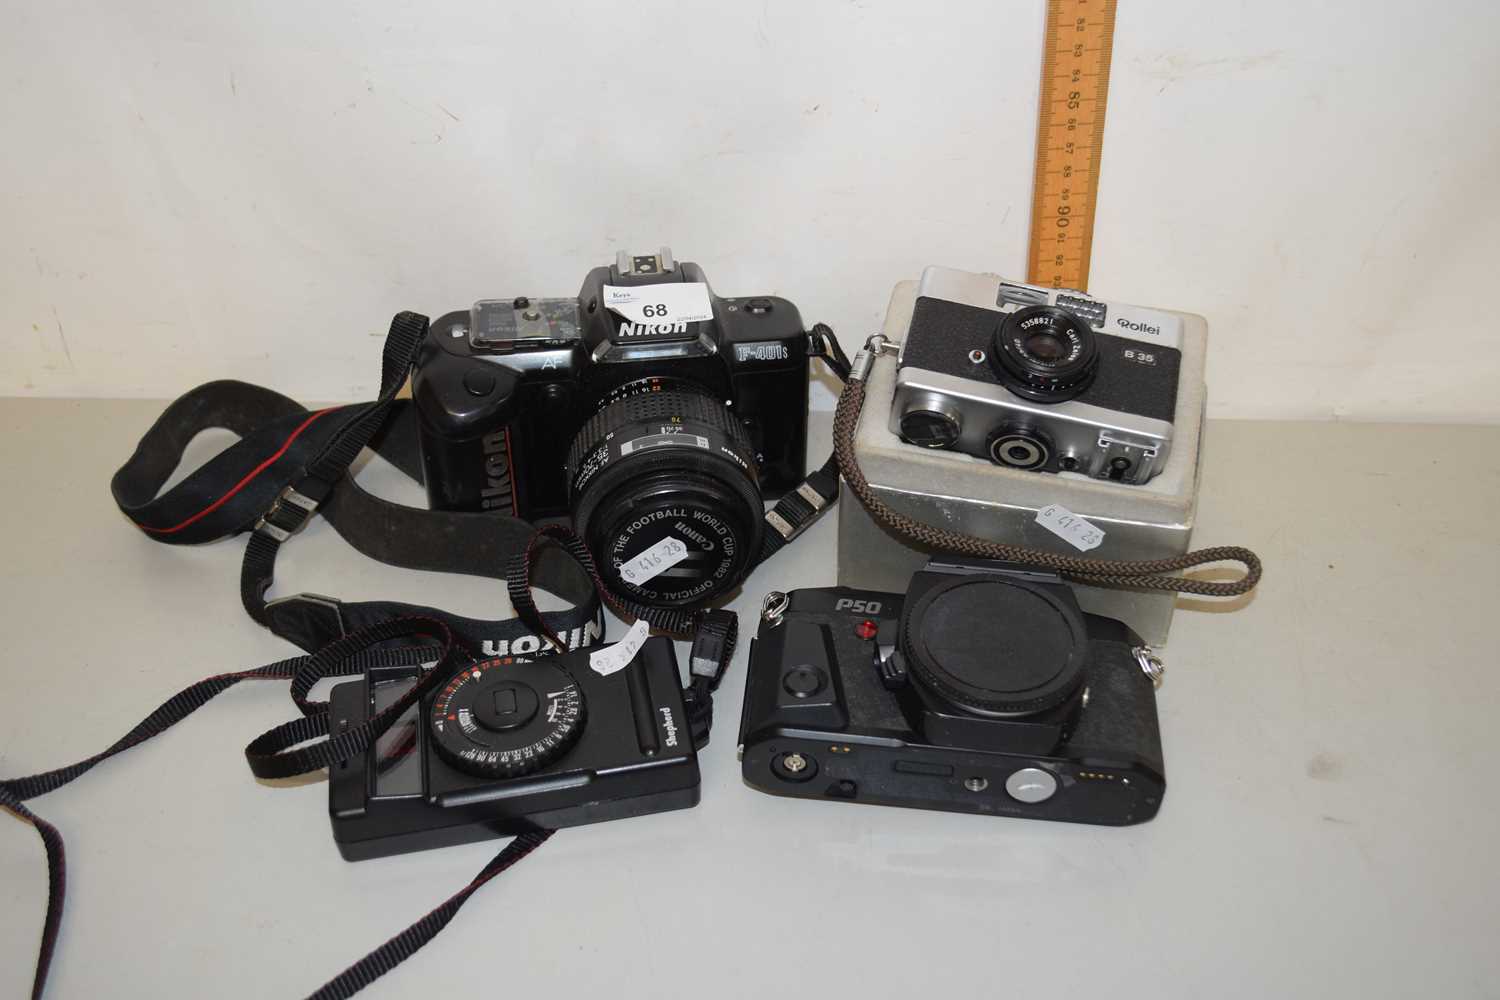 Mixed Lot: Assorted cameras to include Nikon F-401S, Pentax P50, Rollie B35 and a further flash